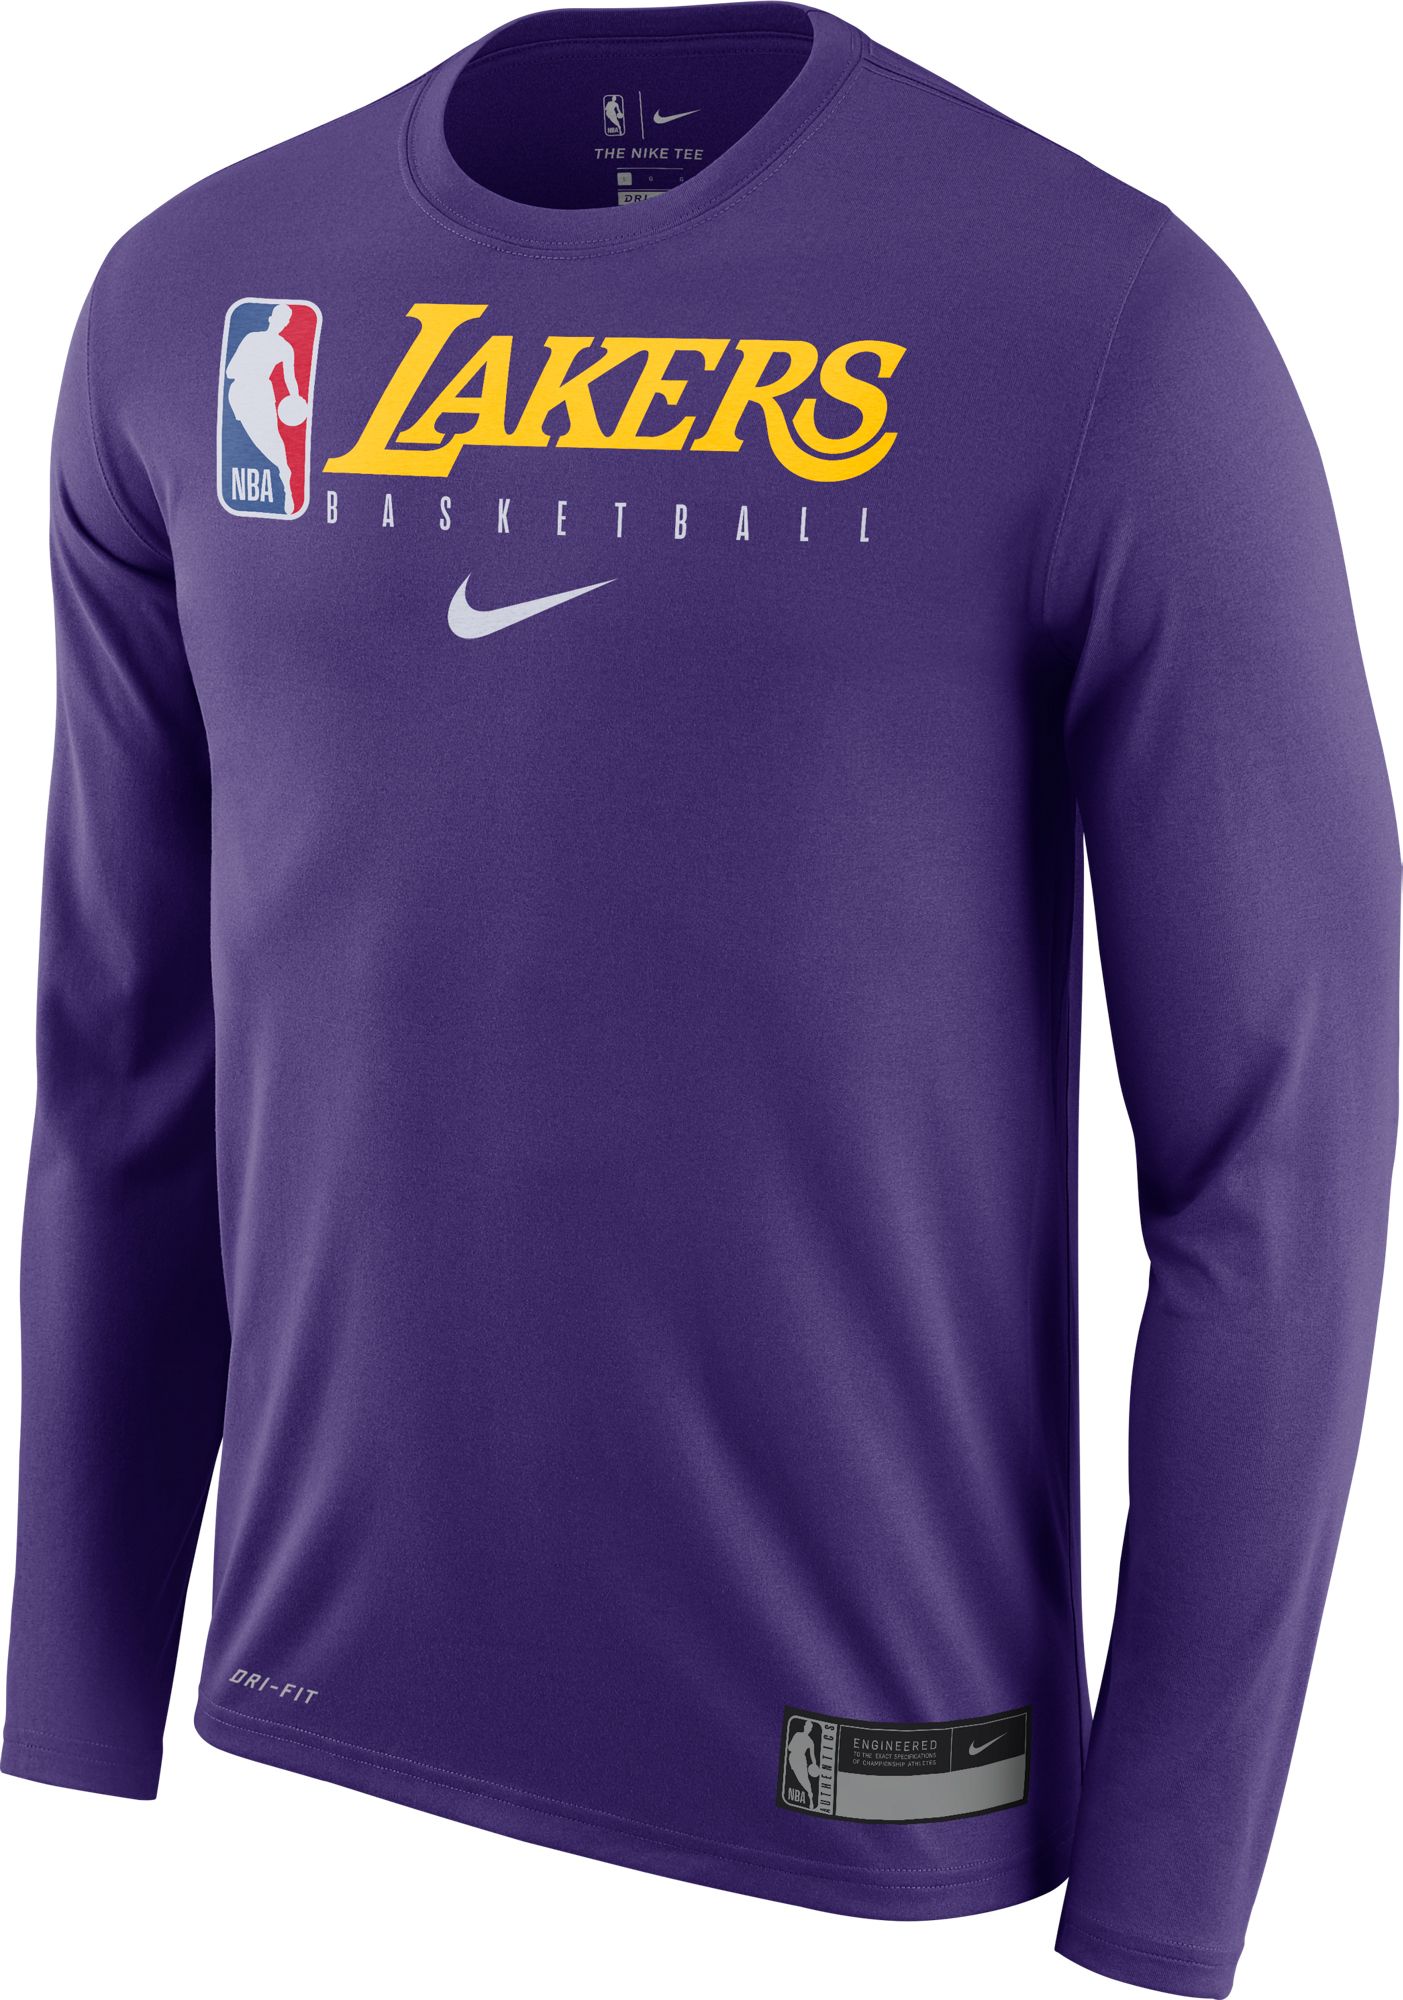 los angeles lakers practice shirt